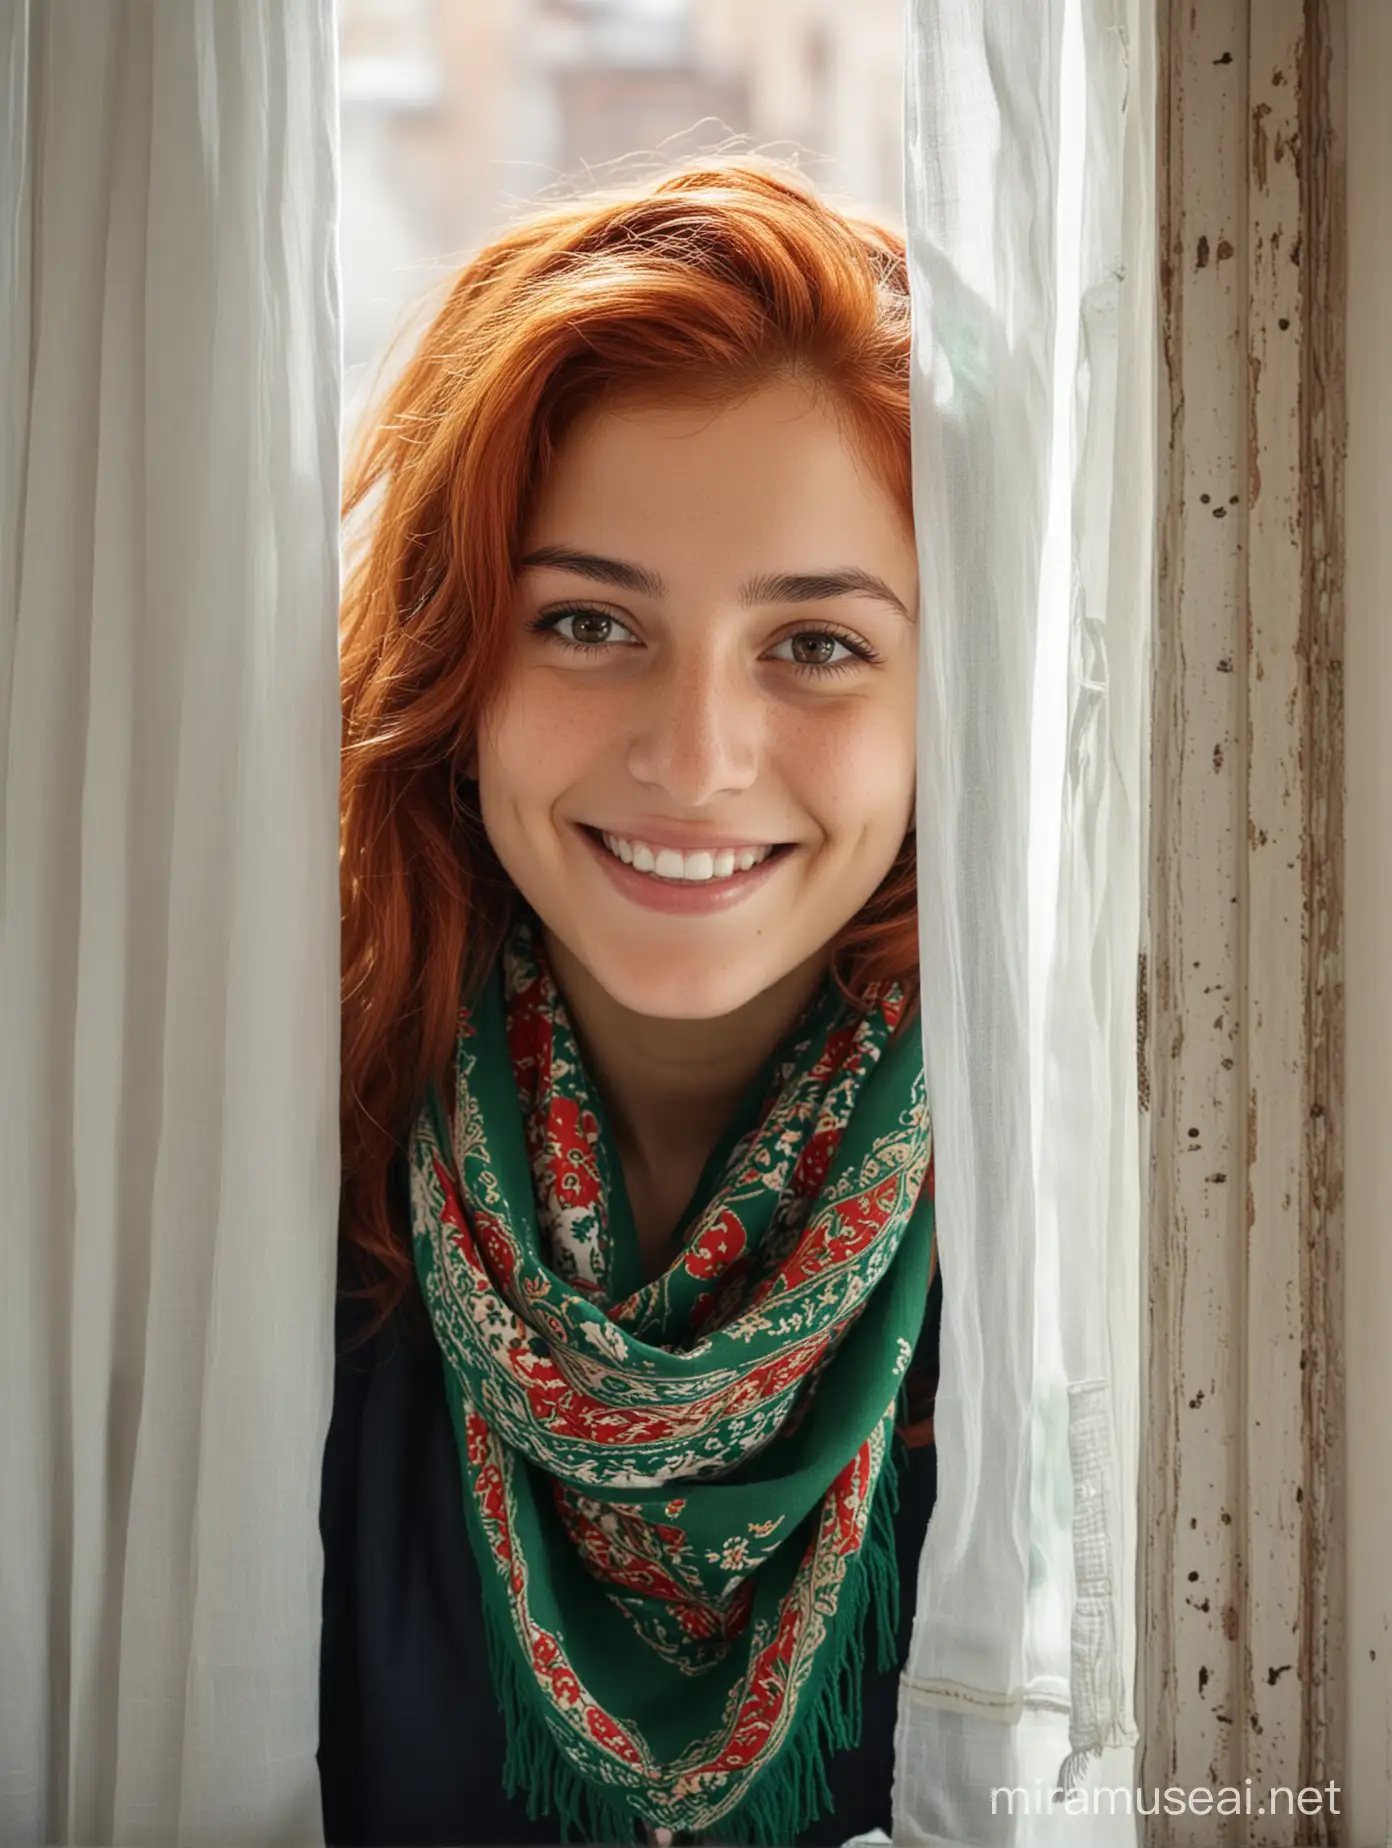 A young girl with red hair and an Iranian face and a small green scarf is smiling next to an old window with a white curtain